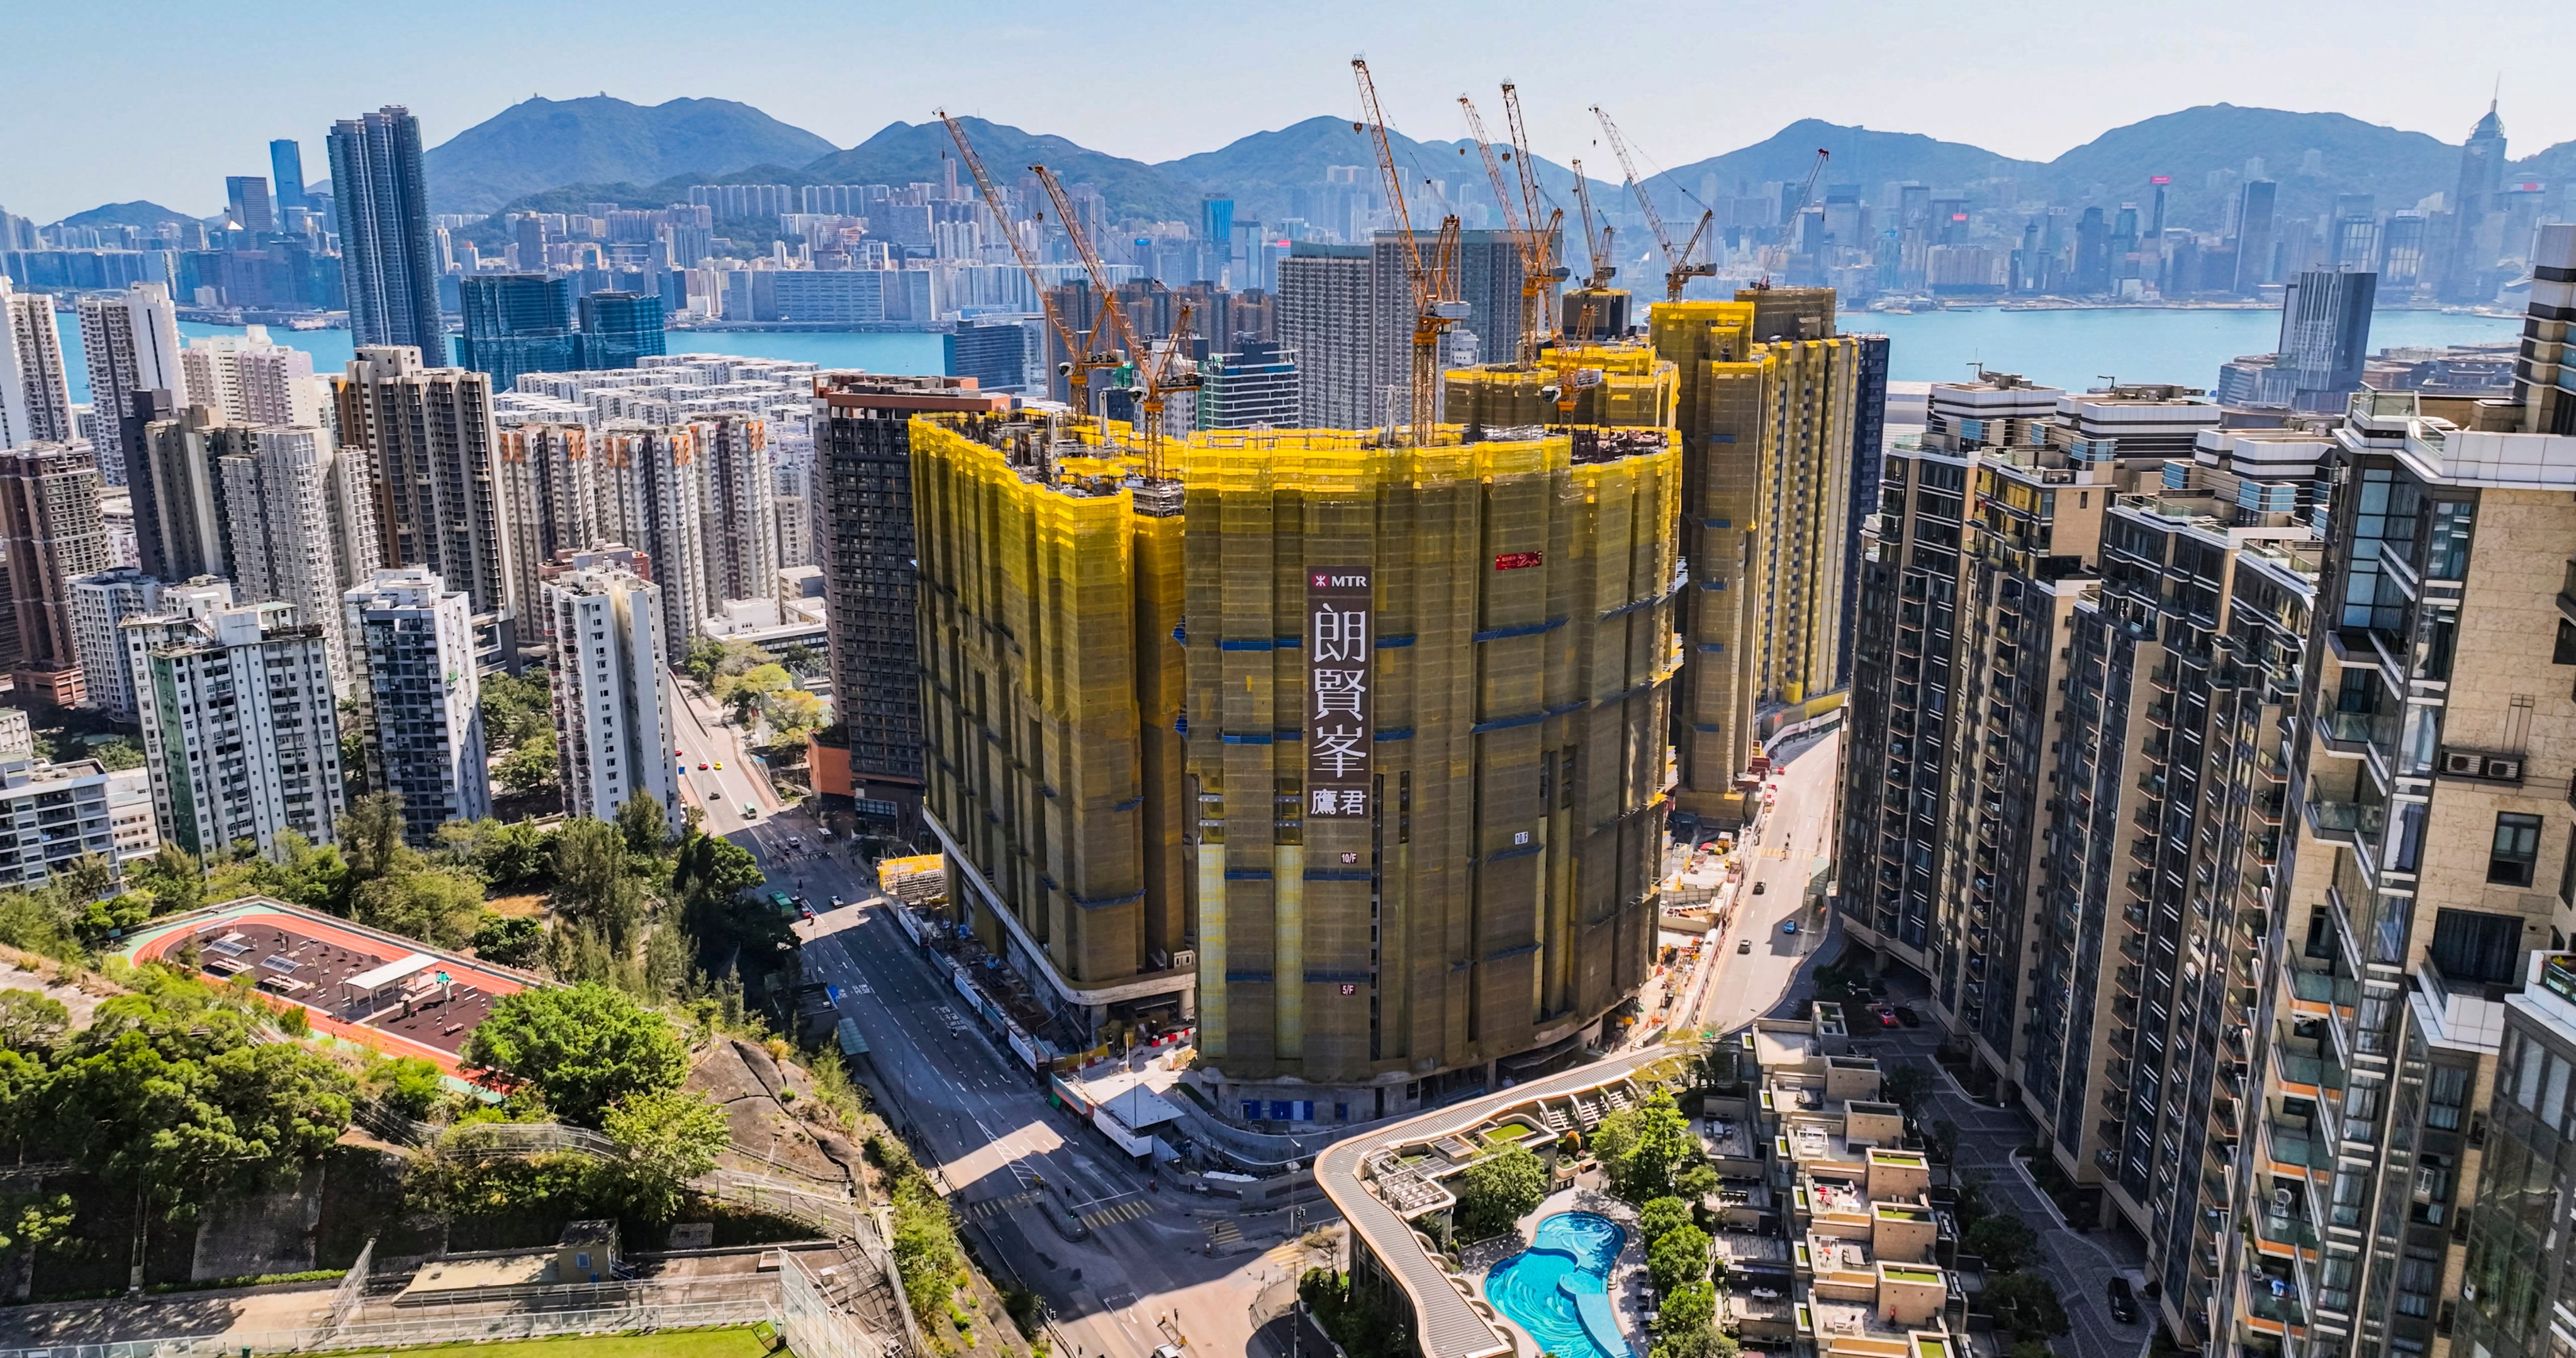 The first flats at Great Eagle Holdings’ Onmantin project in Kowloon went on sale at an eight-year low for the neighborhood. Photo: Handout